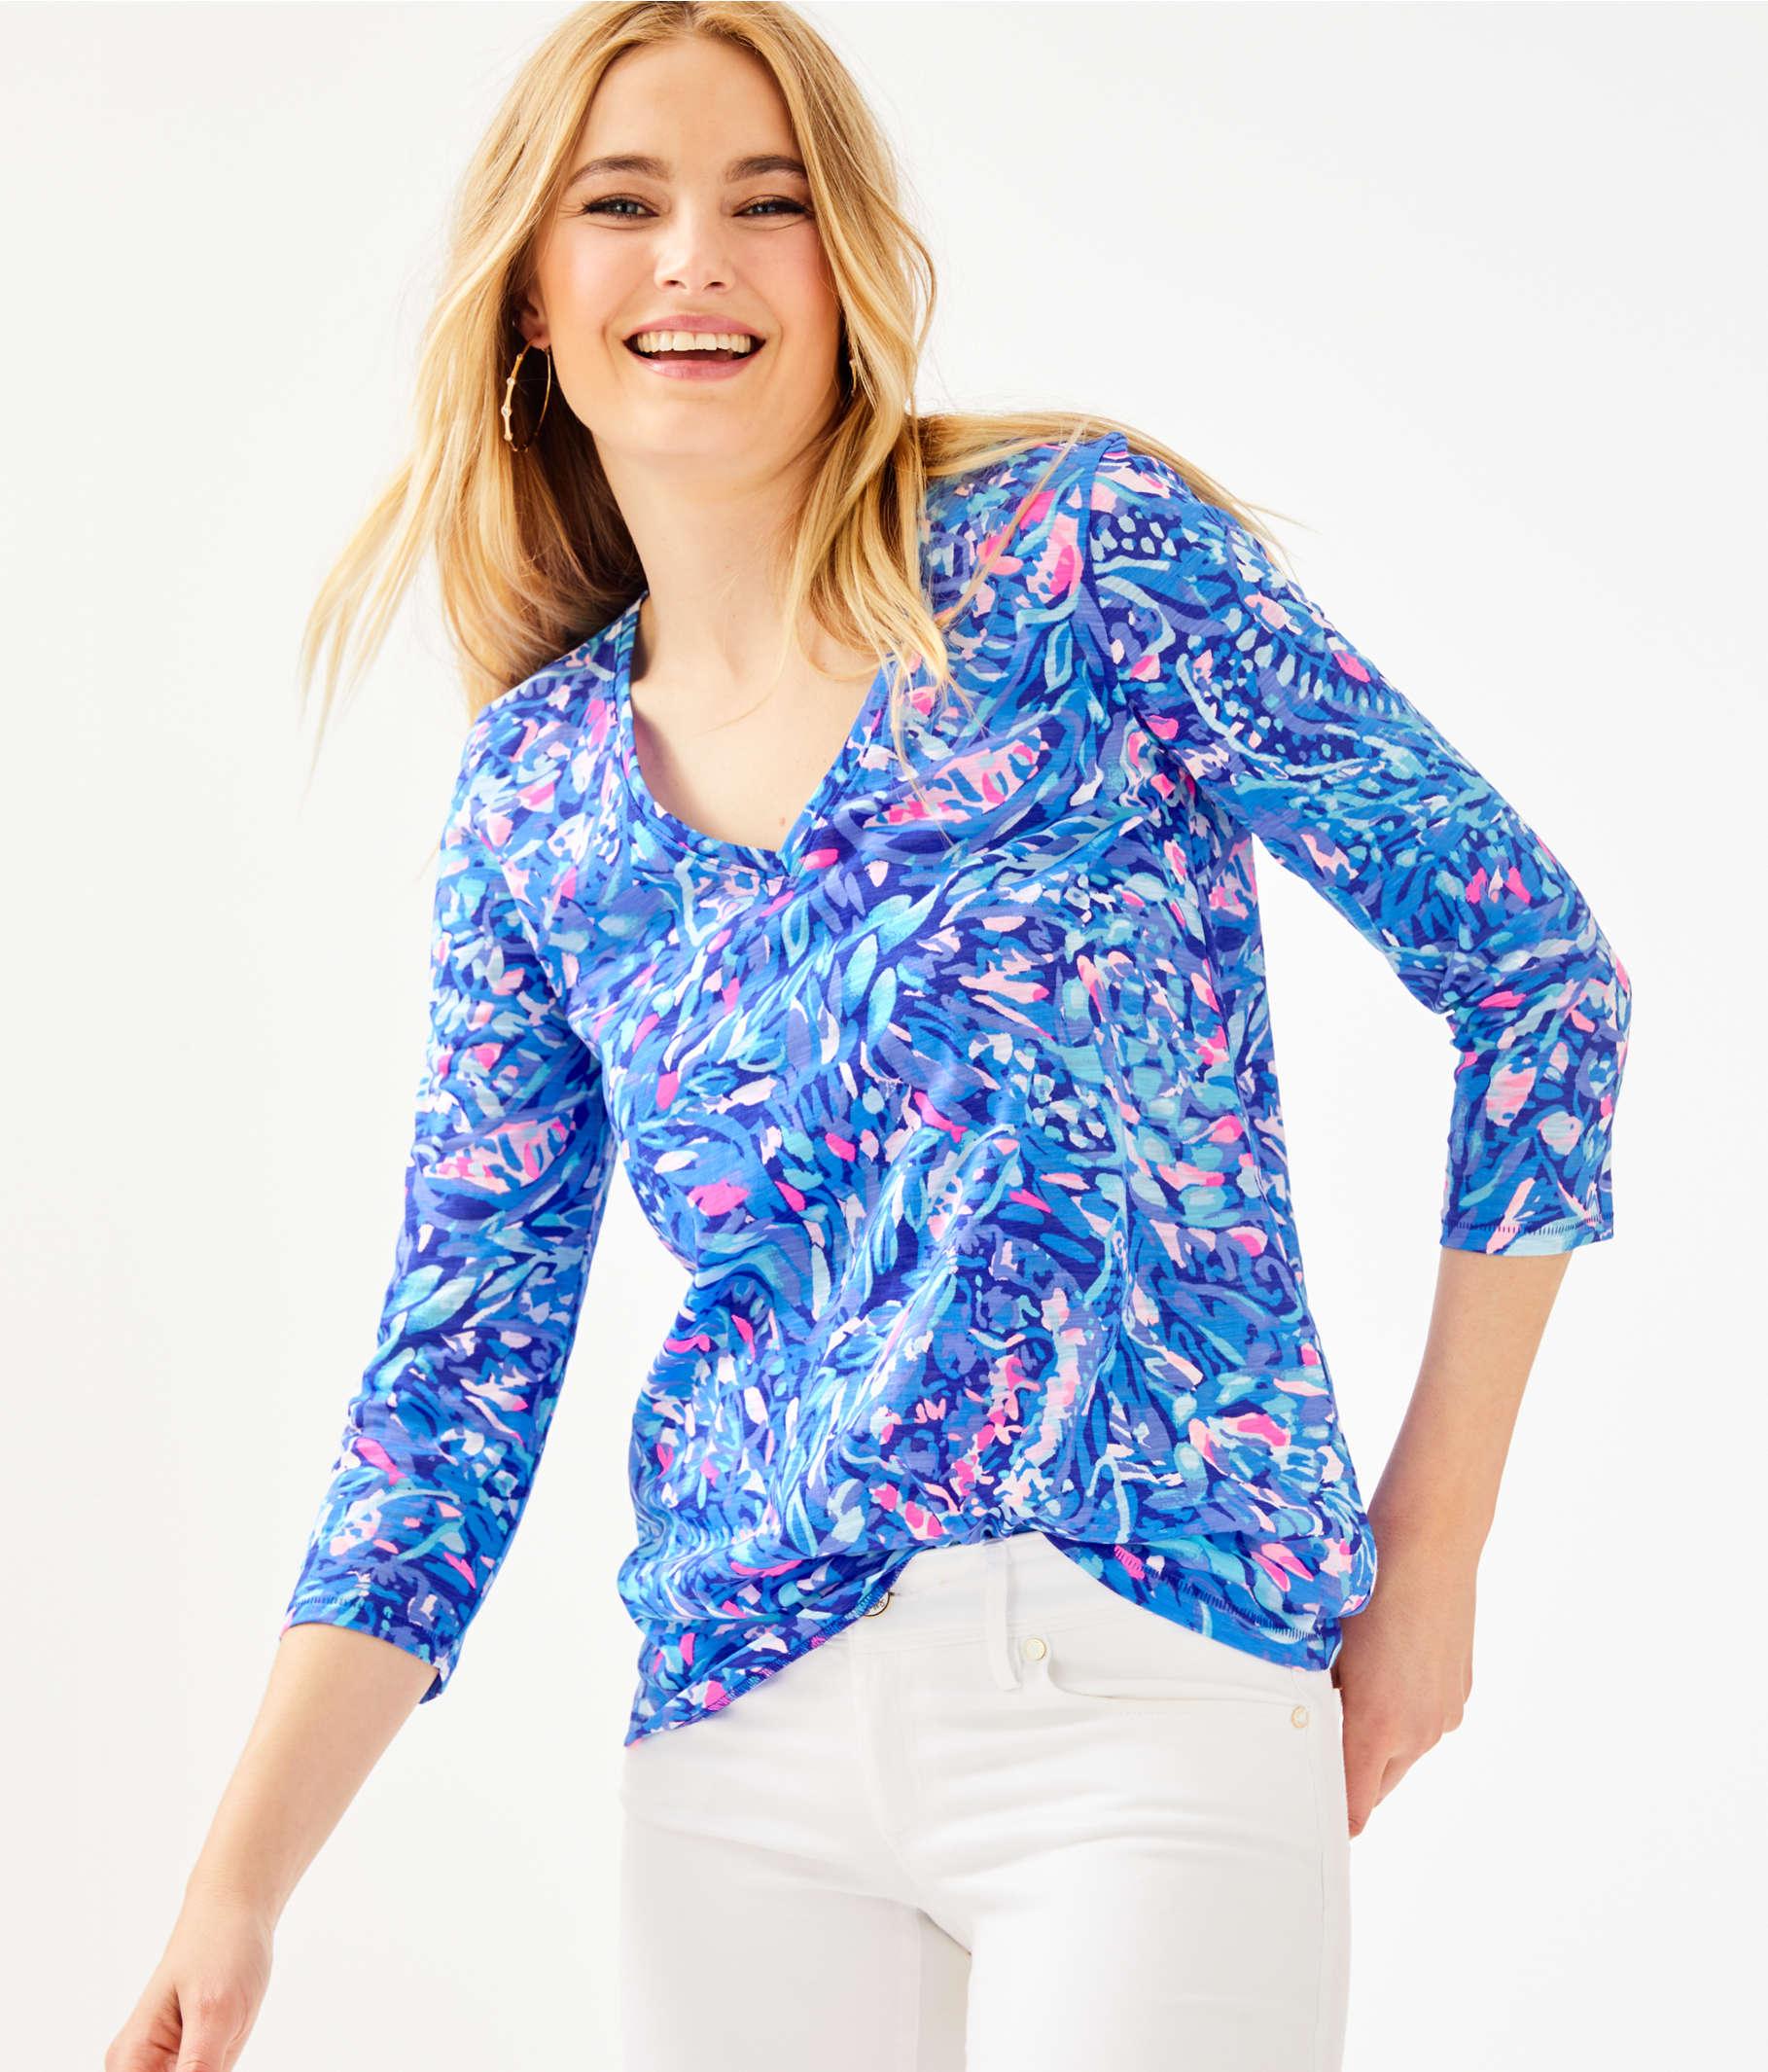 Lilly Pulitzer Etta 3/4 Sleeve Top in Blue - Lyst